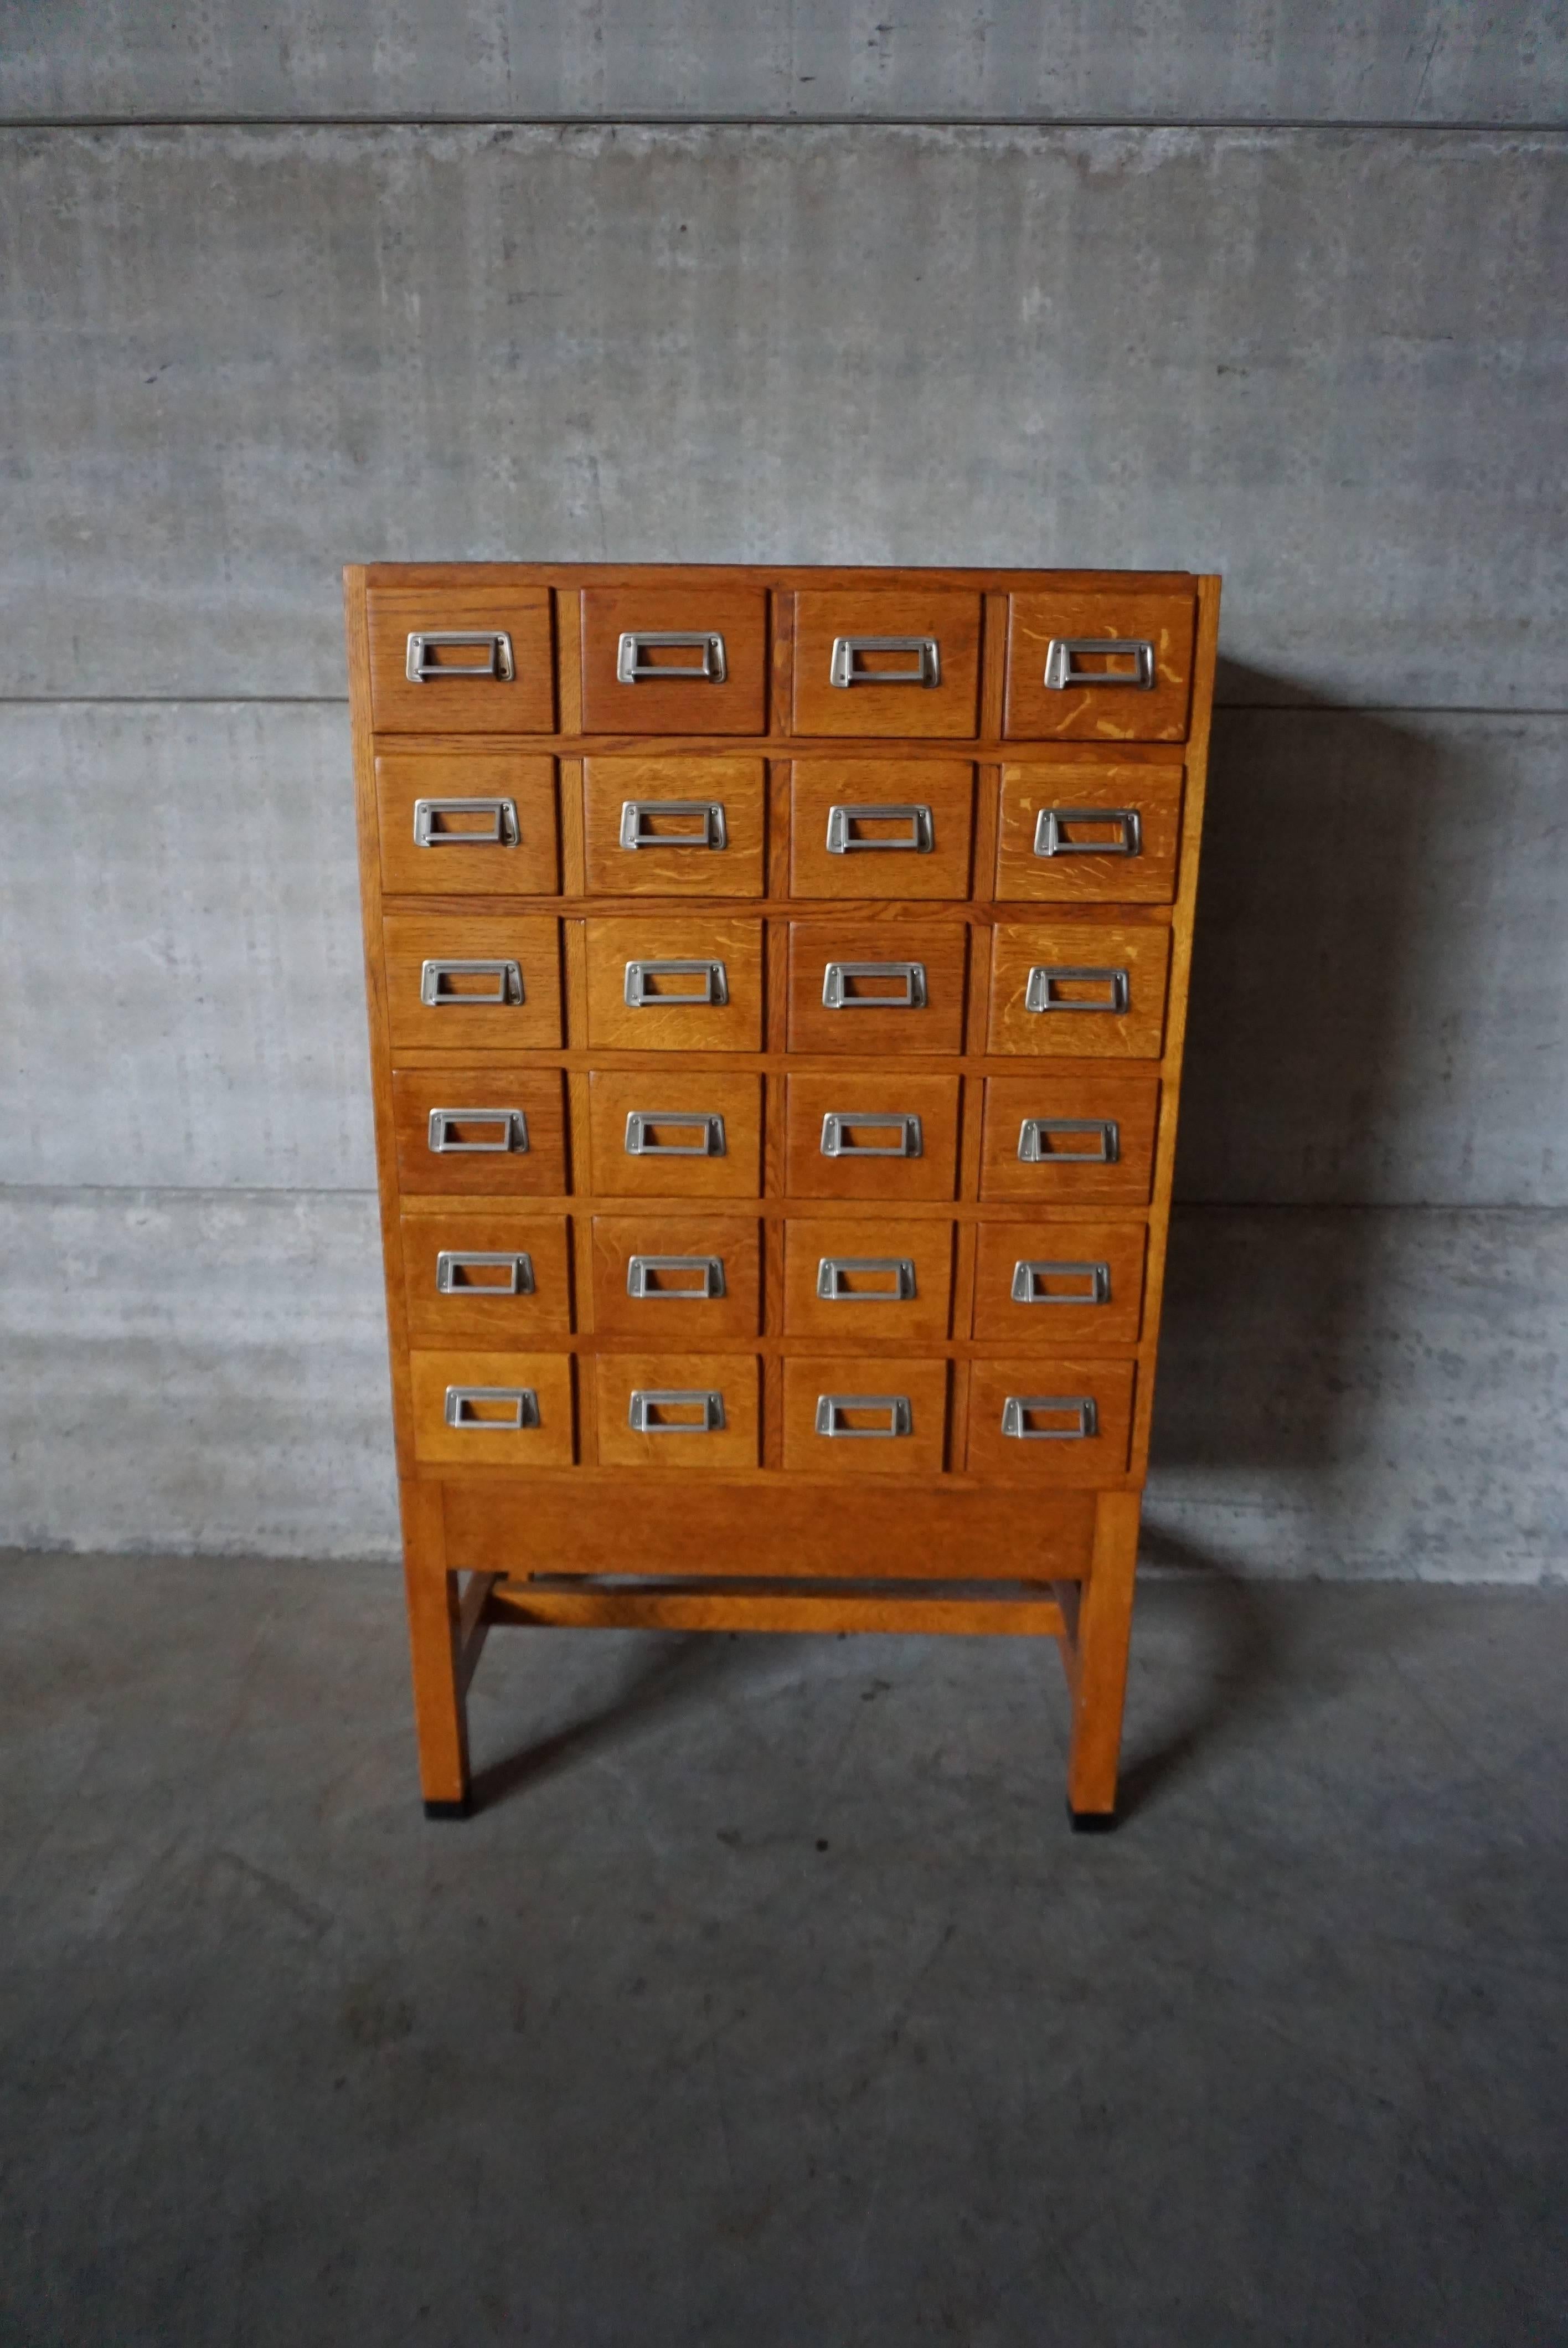 This Industrial wooden filing cabinet is made from oak and was designed and made in the 1950s. It is in a very good vintage condition with signs of use consistent with age.